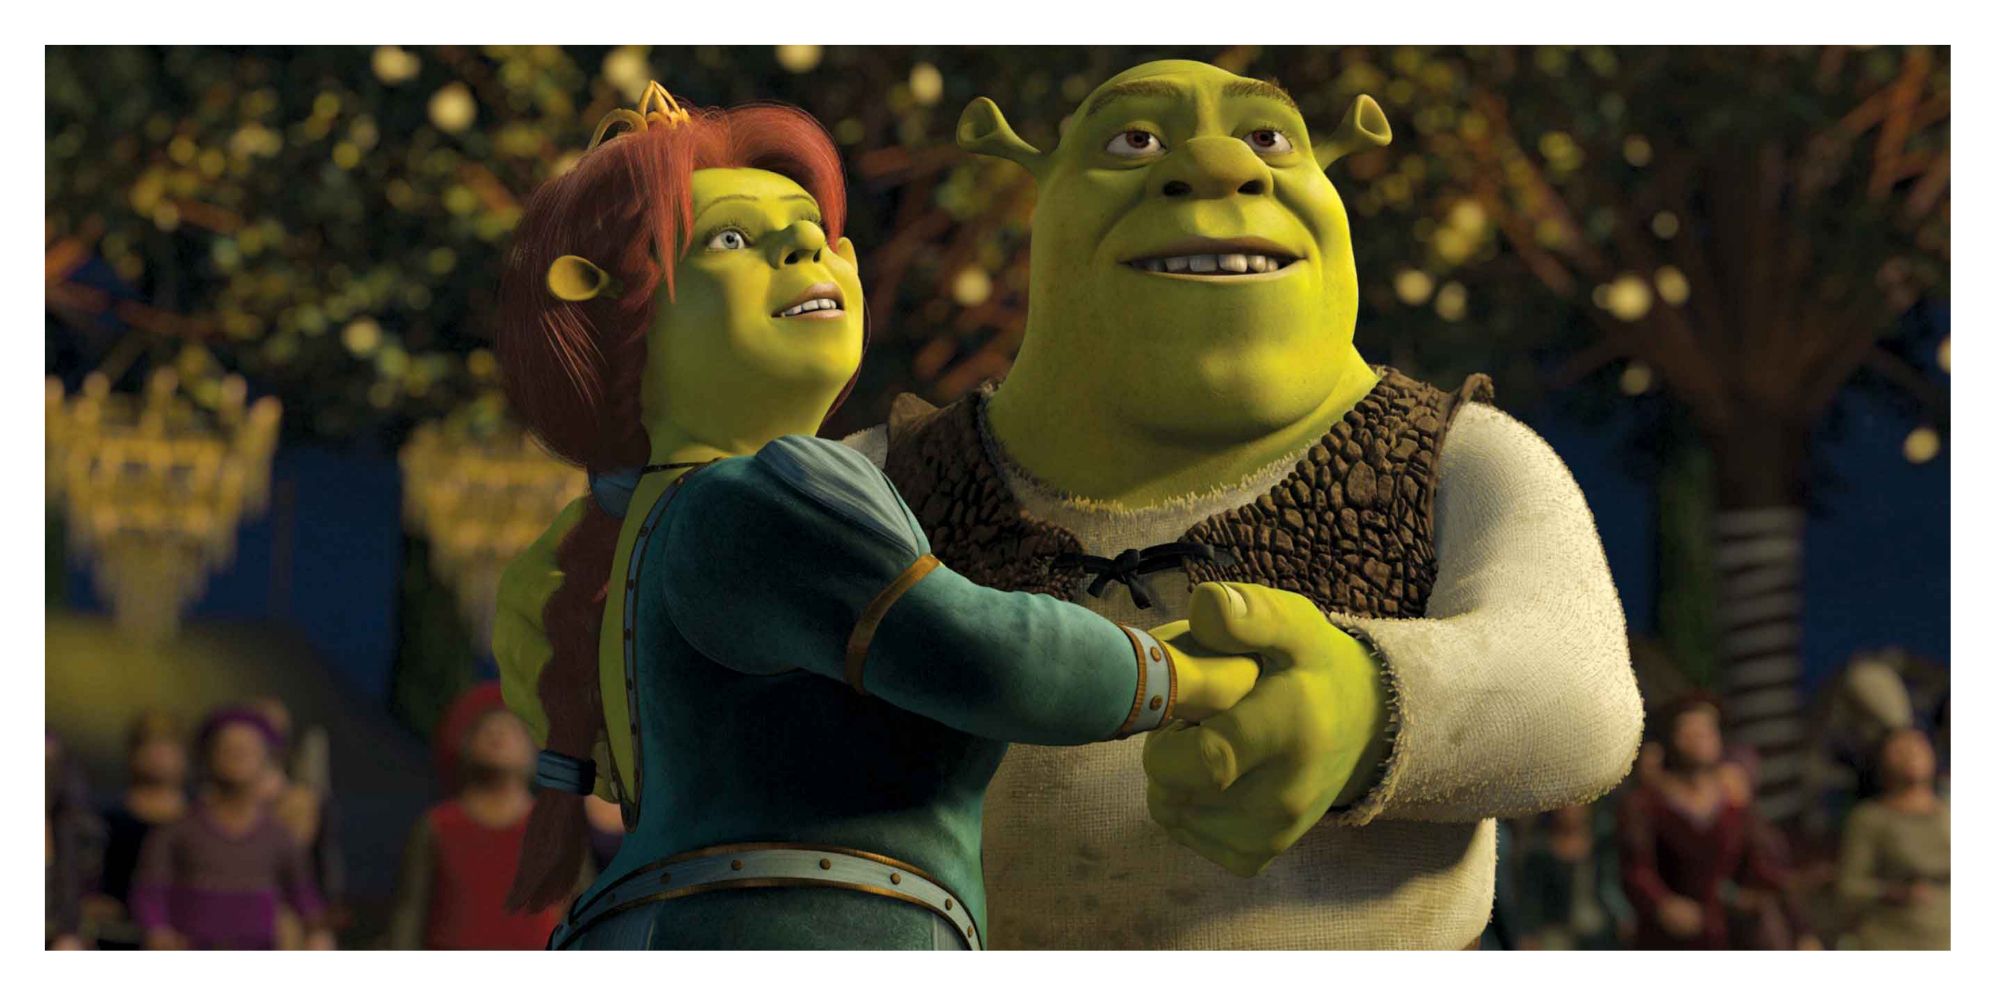 Shrek and Fiona at the end of Shrek 2